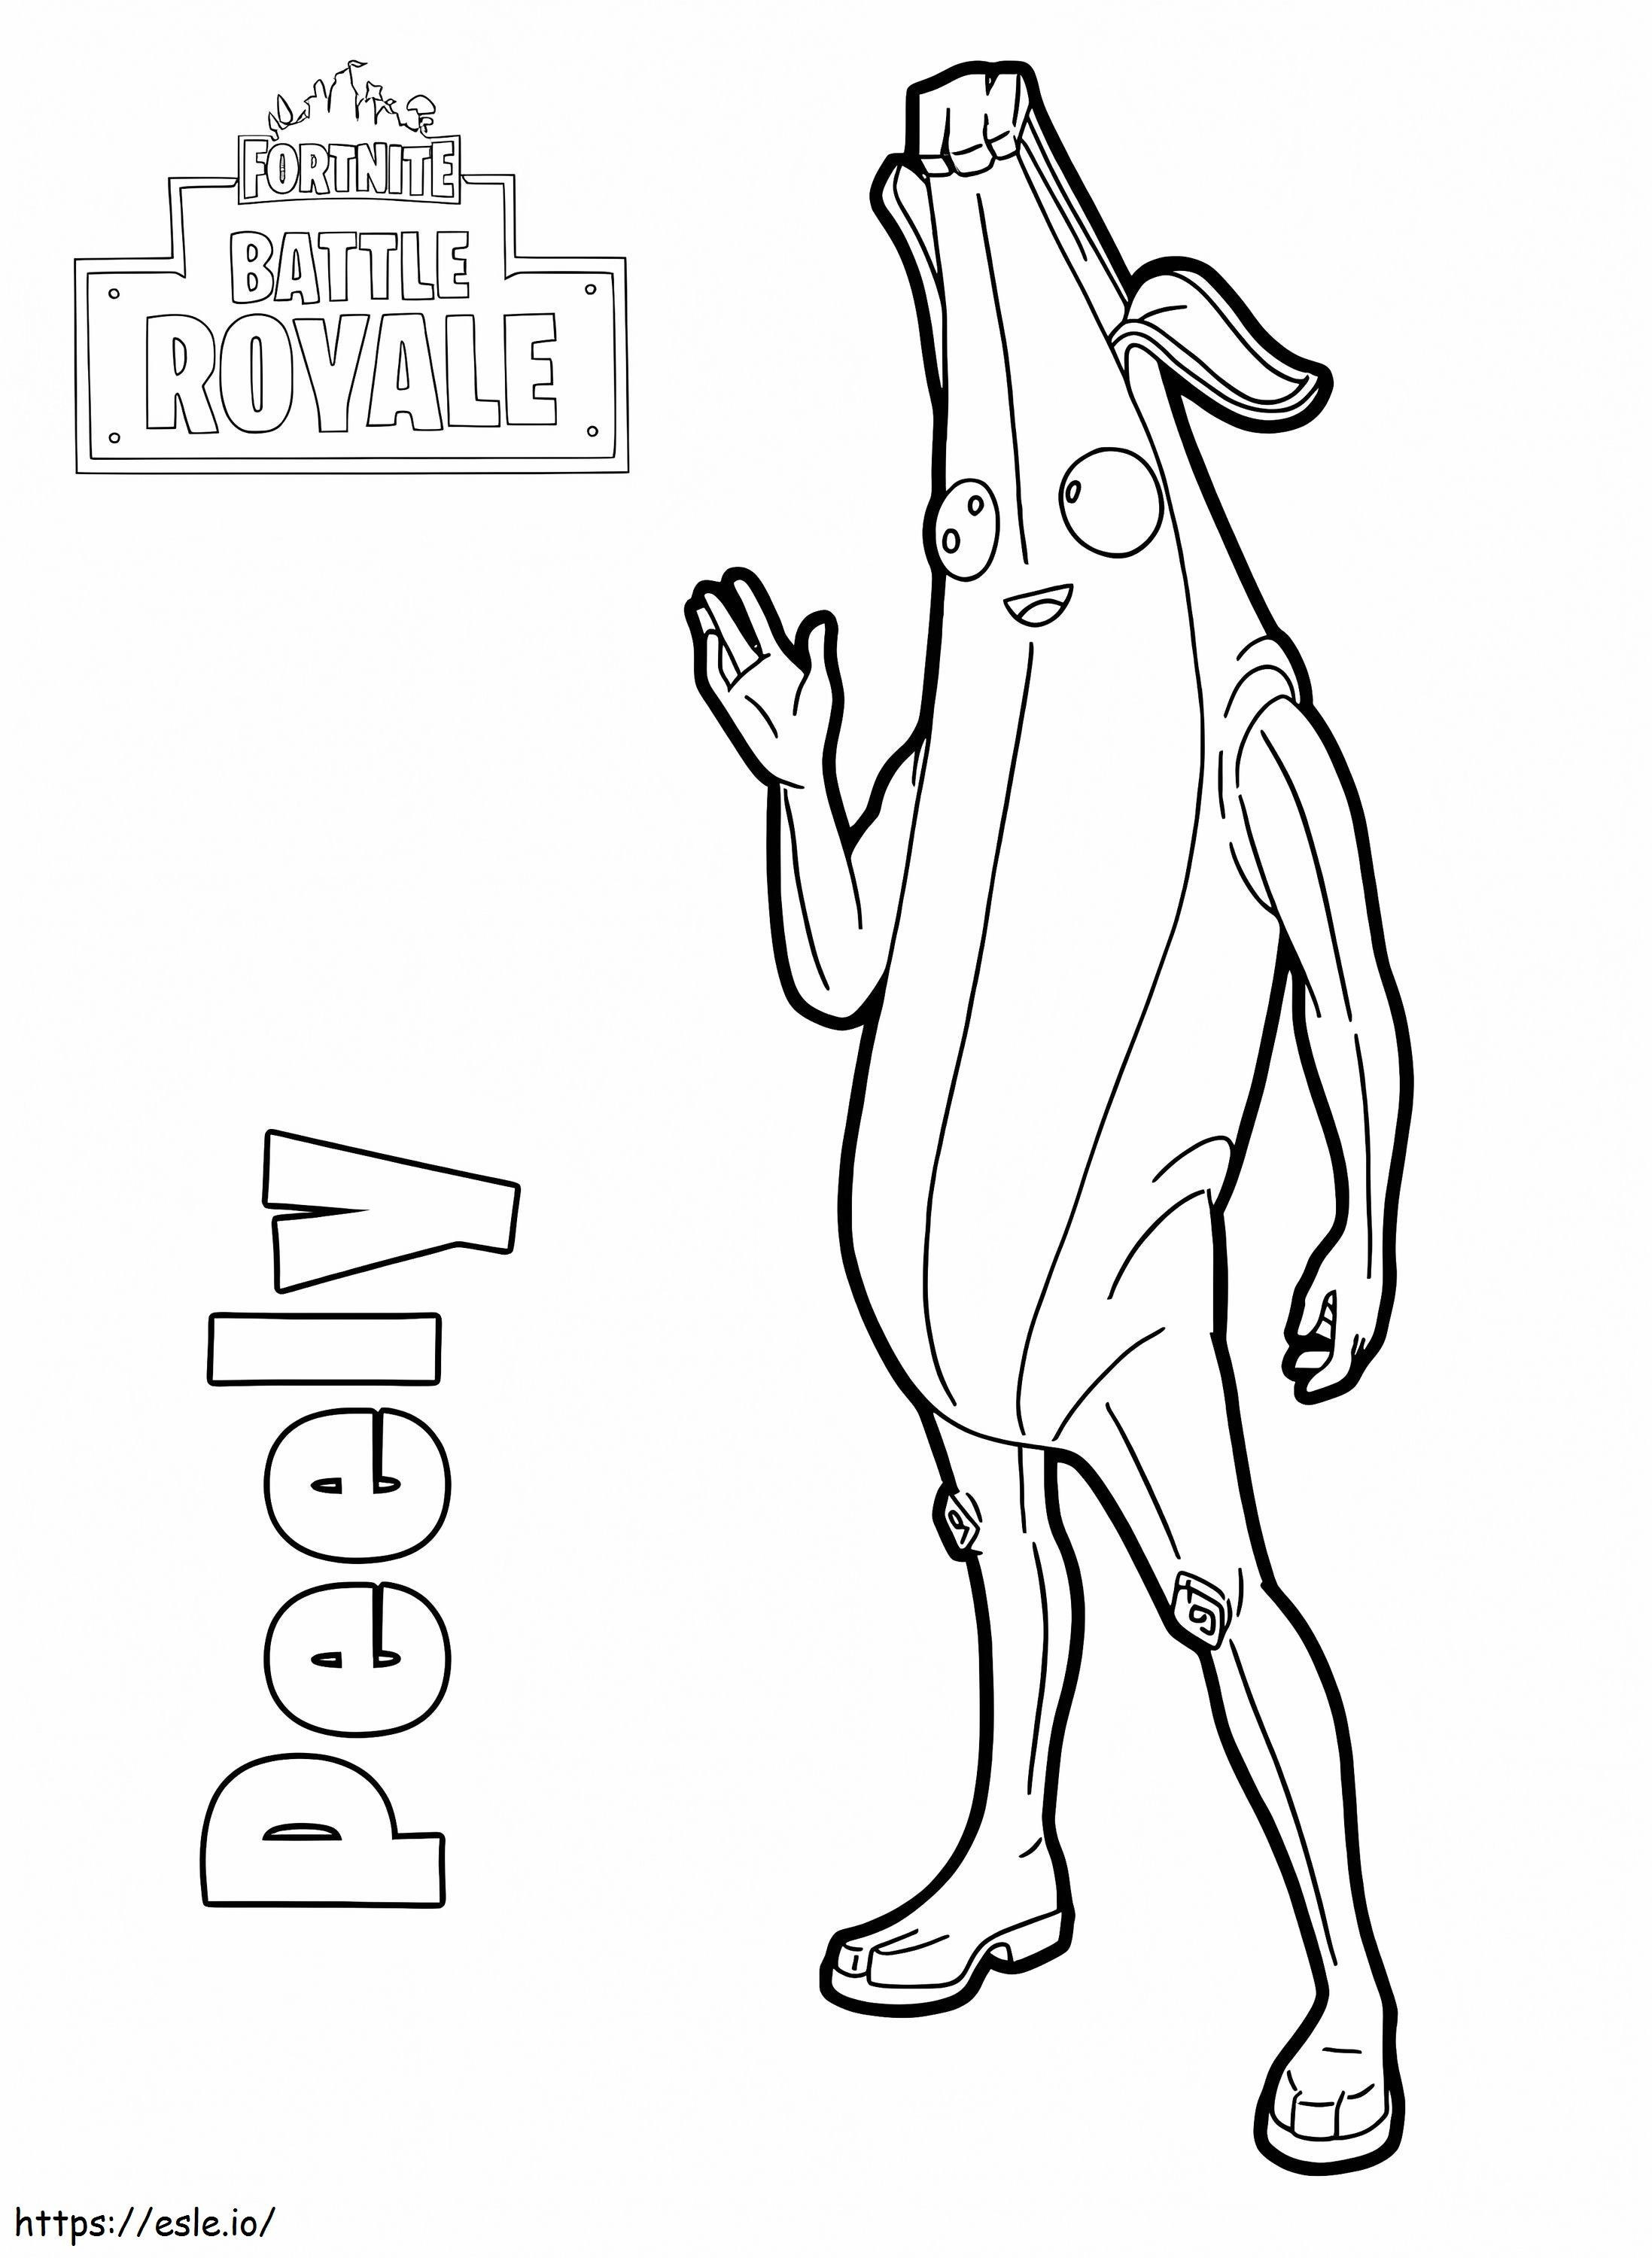 Peely Fortnite coloring page